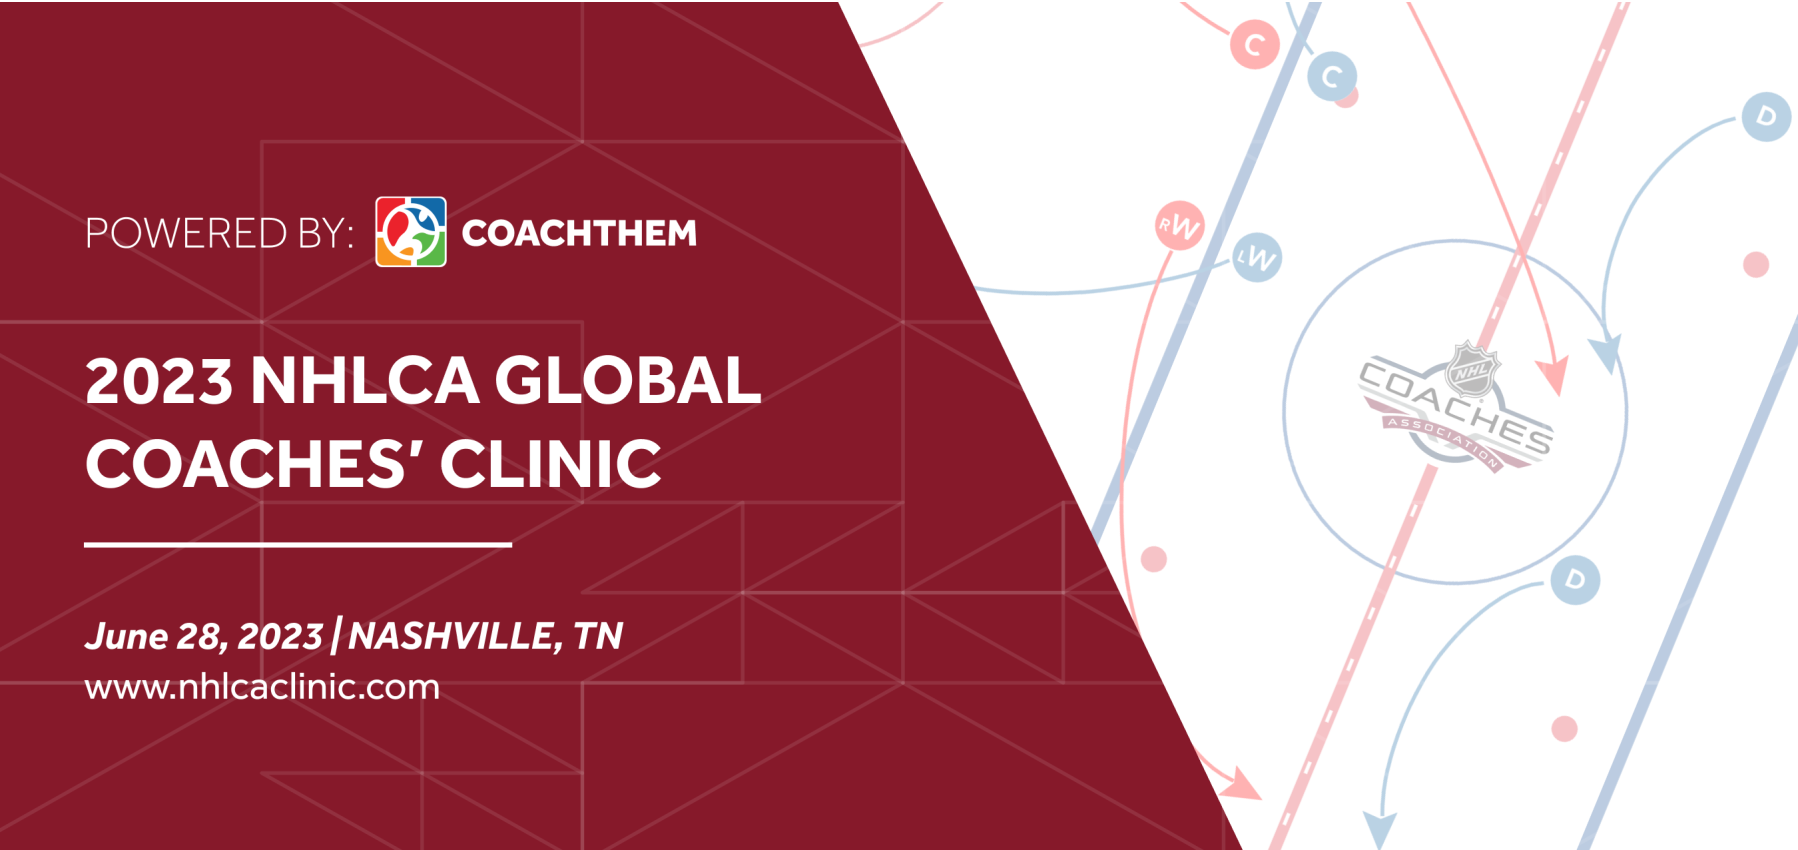 CoachThem at the 2023 NHLCA Global Coaches' Clinic